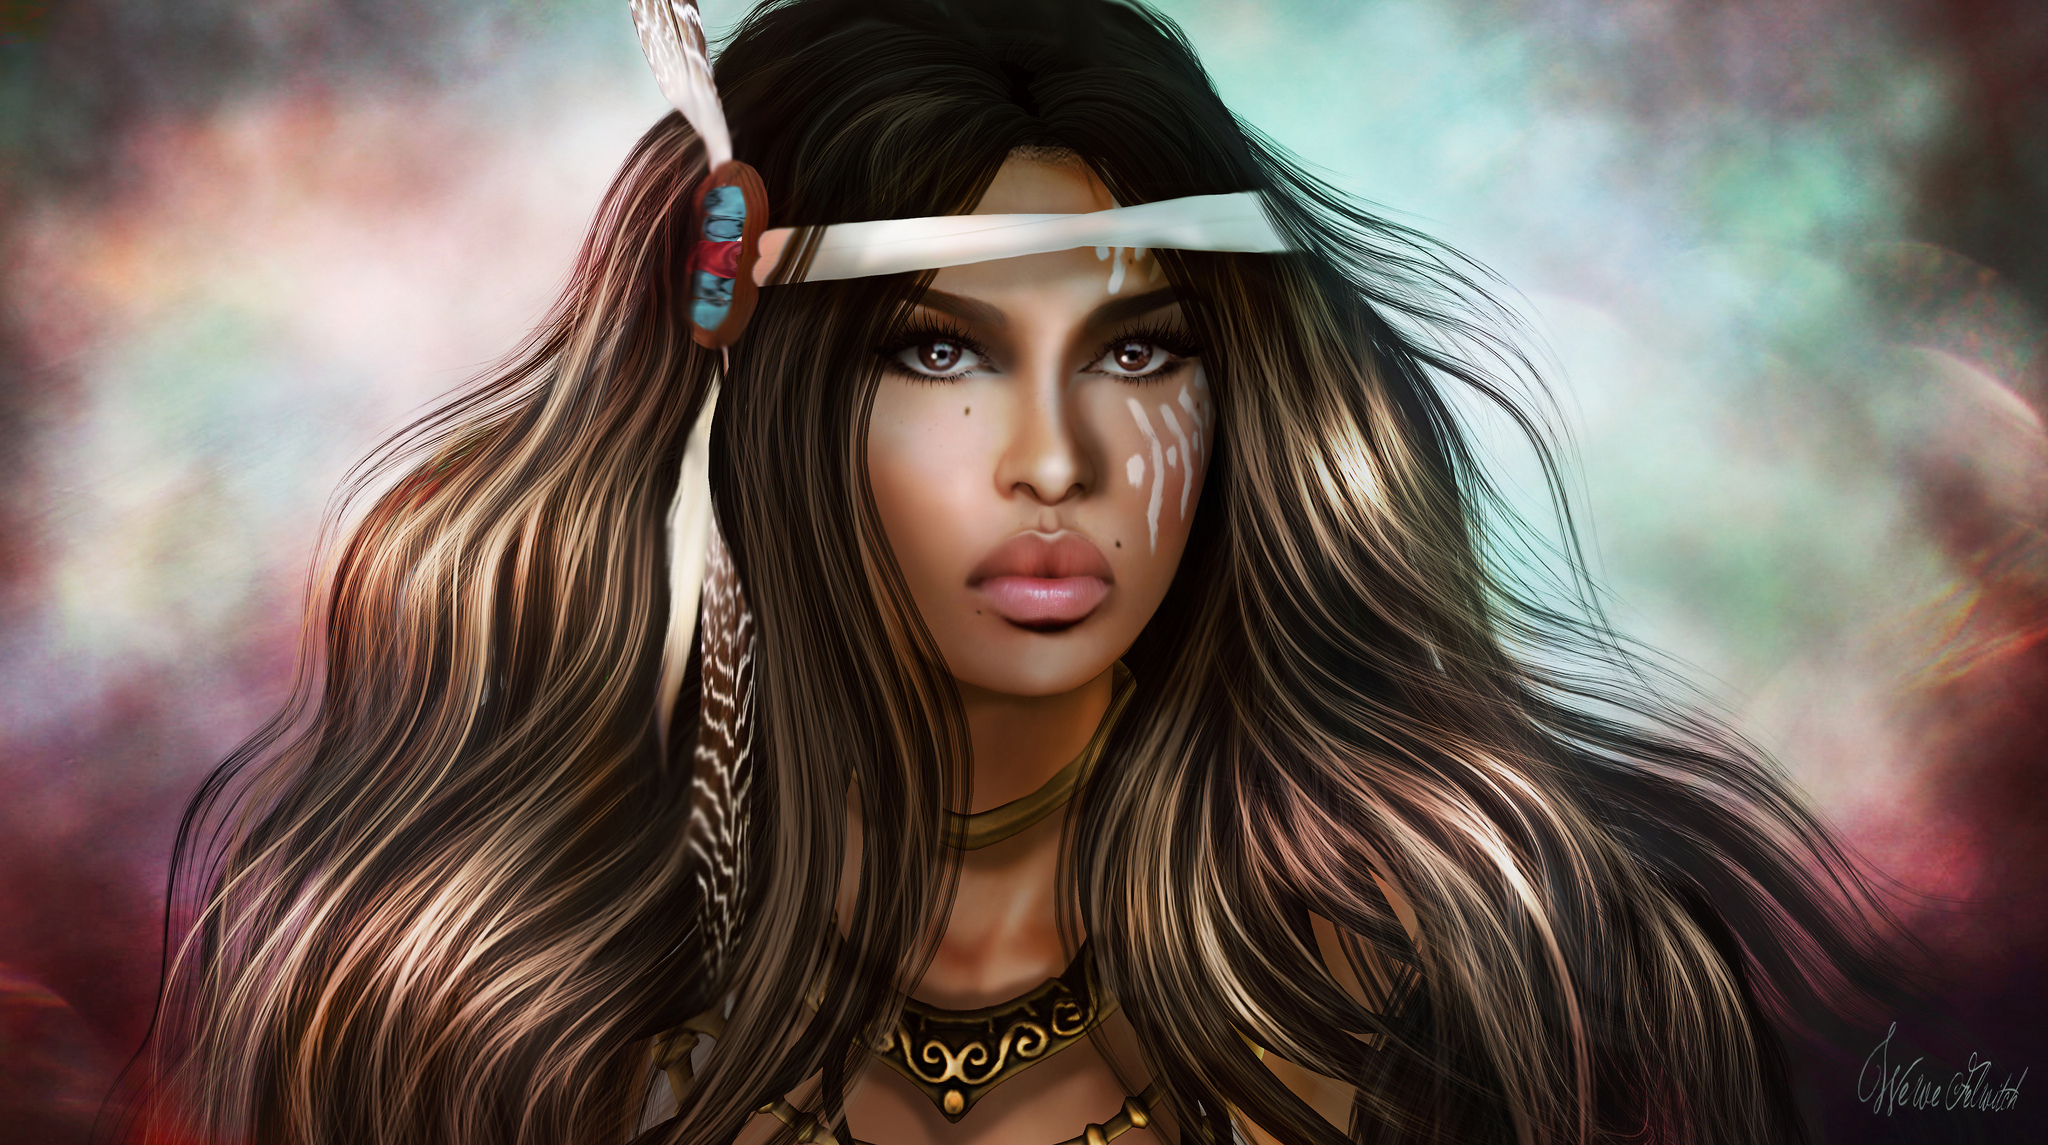 Fantasy Warrior Woman with Face Paint by Giselle Chauveau